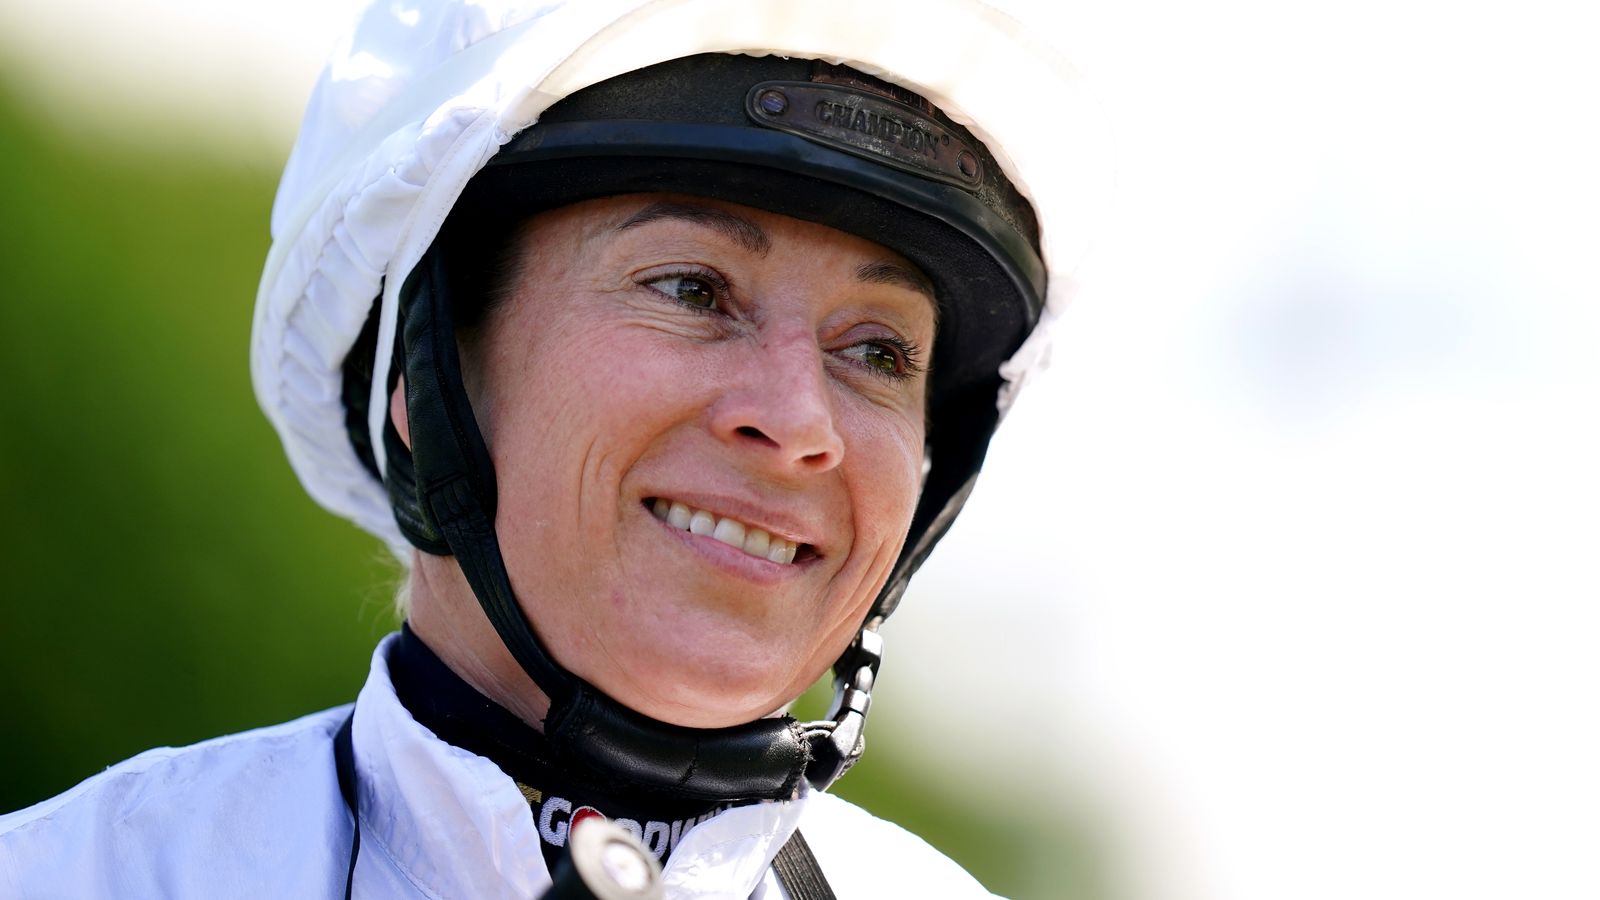 Racing League returns on Sky Sports Racing at Doncaster as Hayley Turner carries hopes of team East